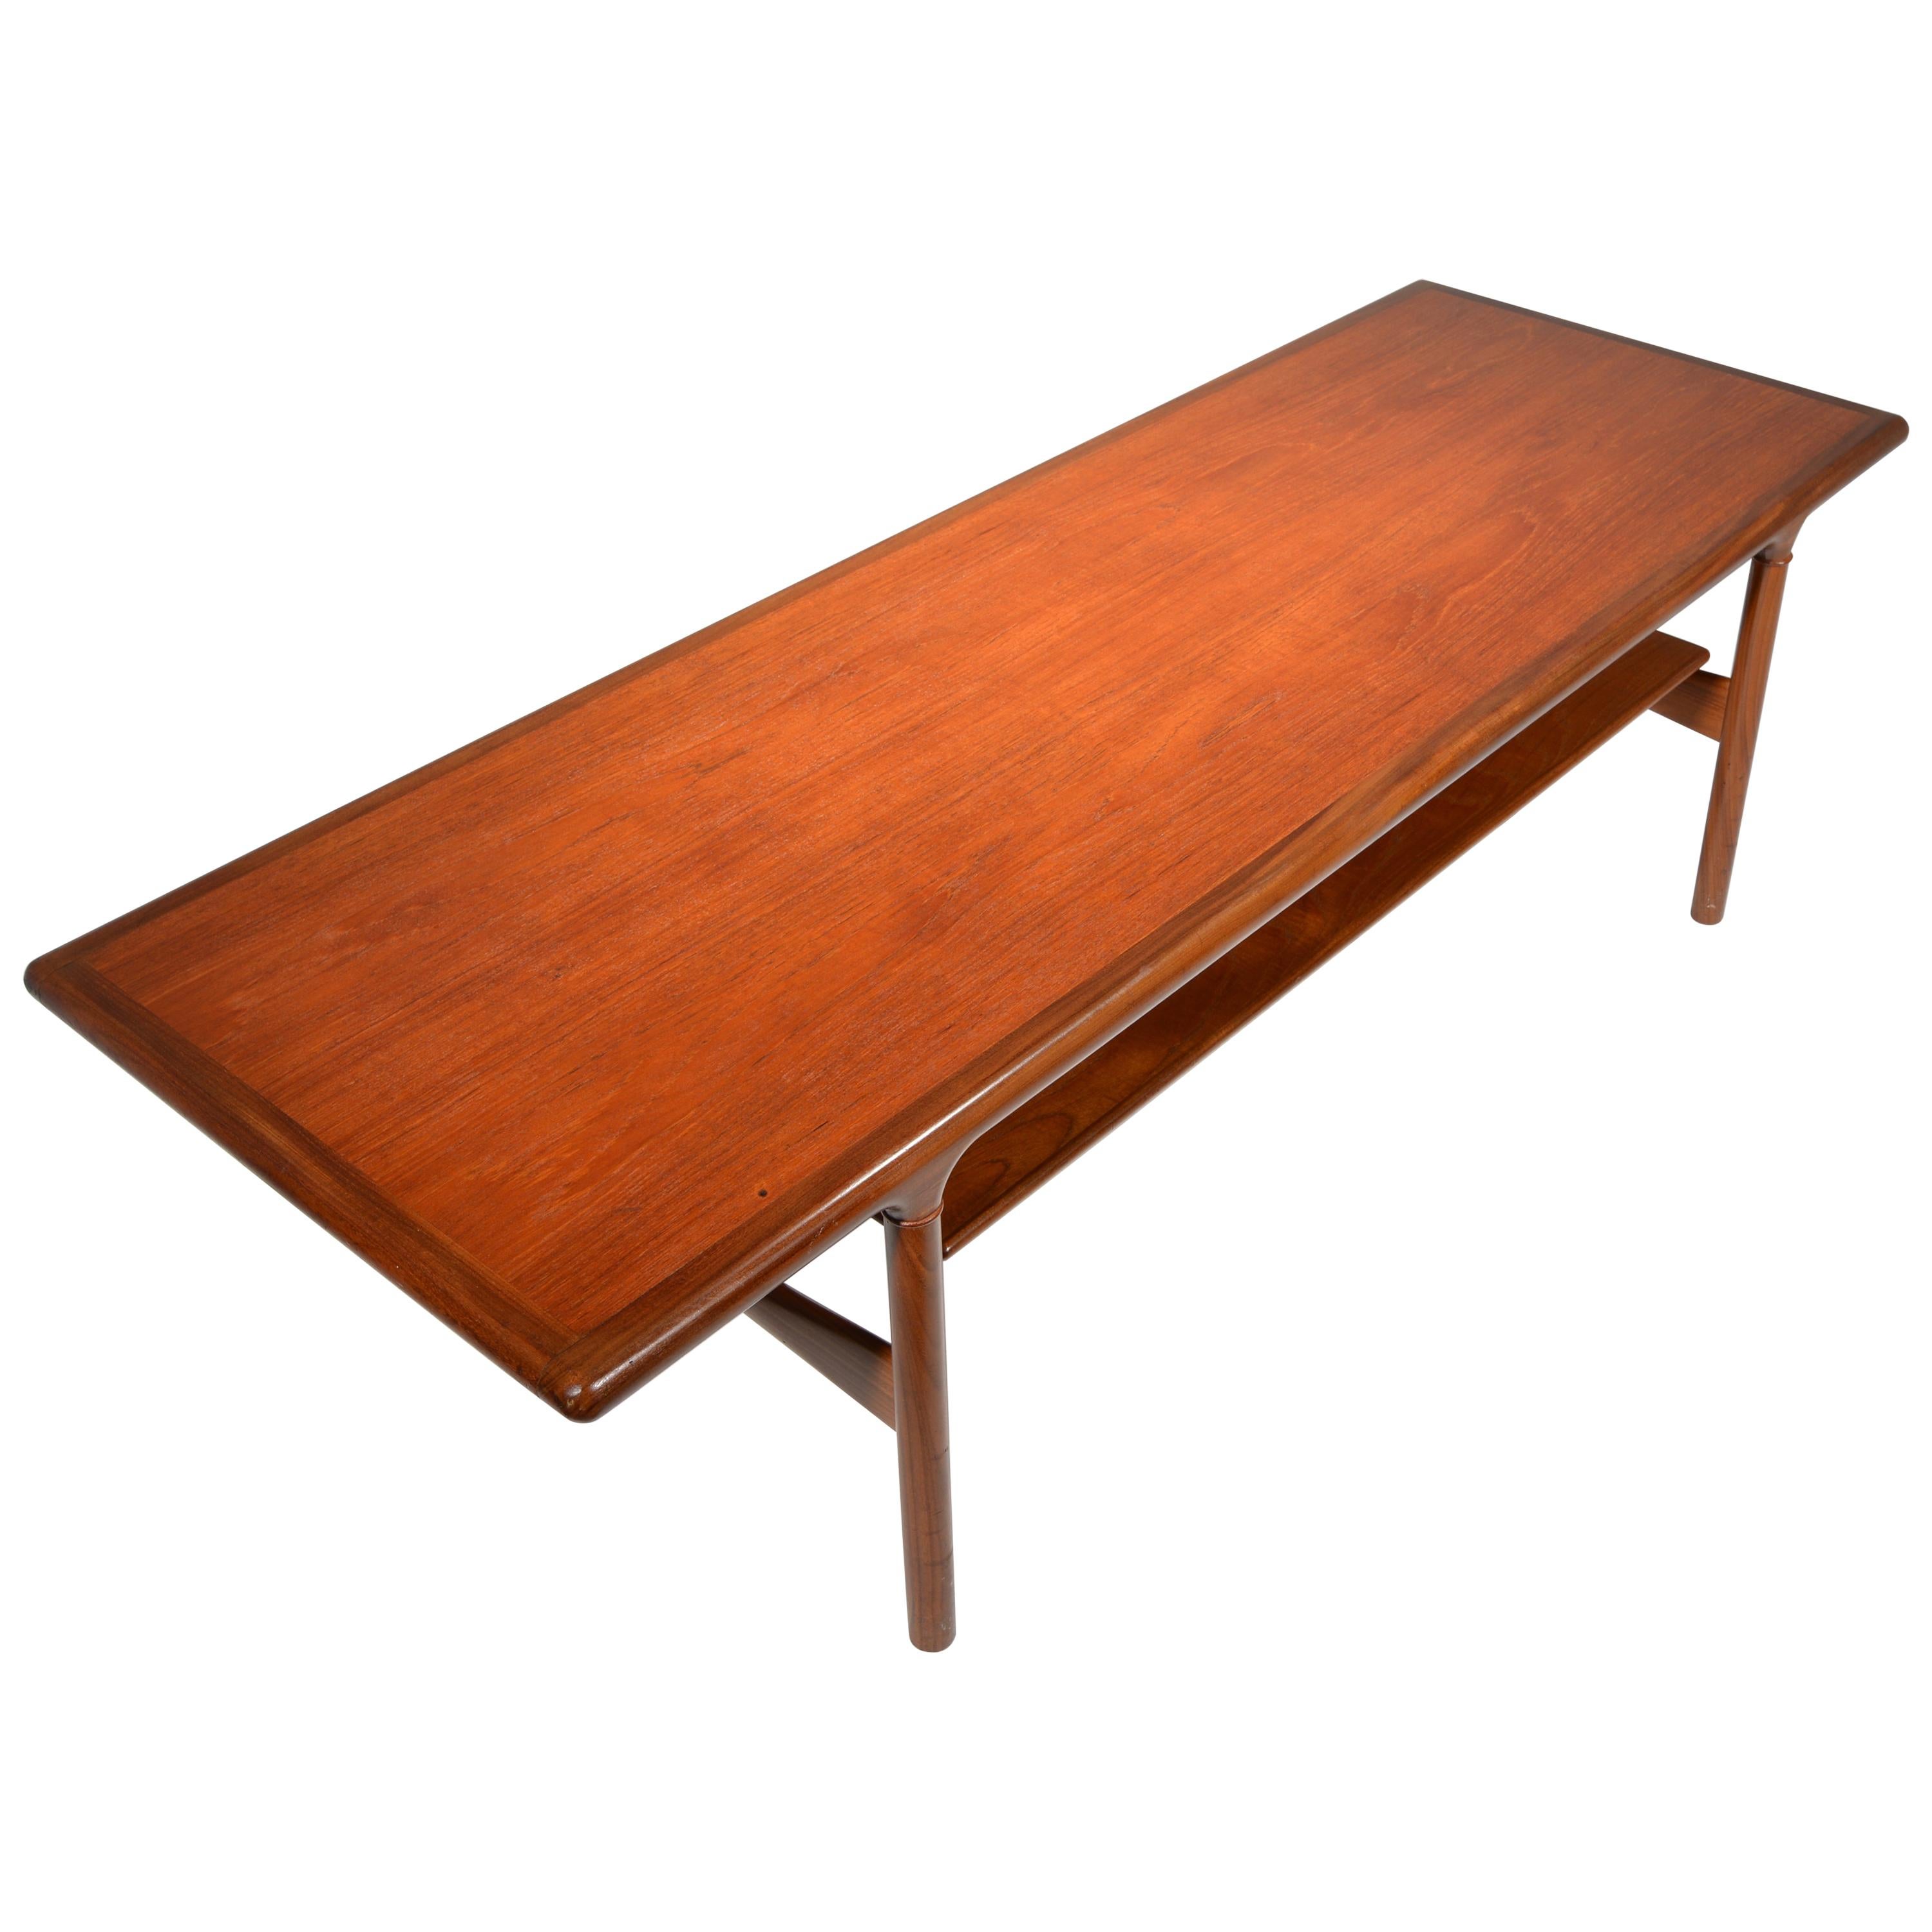 Rare Large Midcentury Extending Teak Coffee Table with Floating Shelf